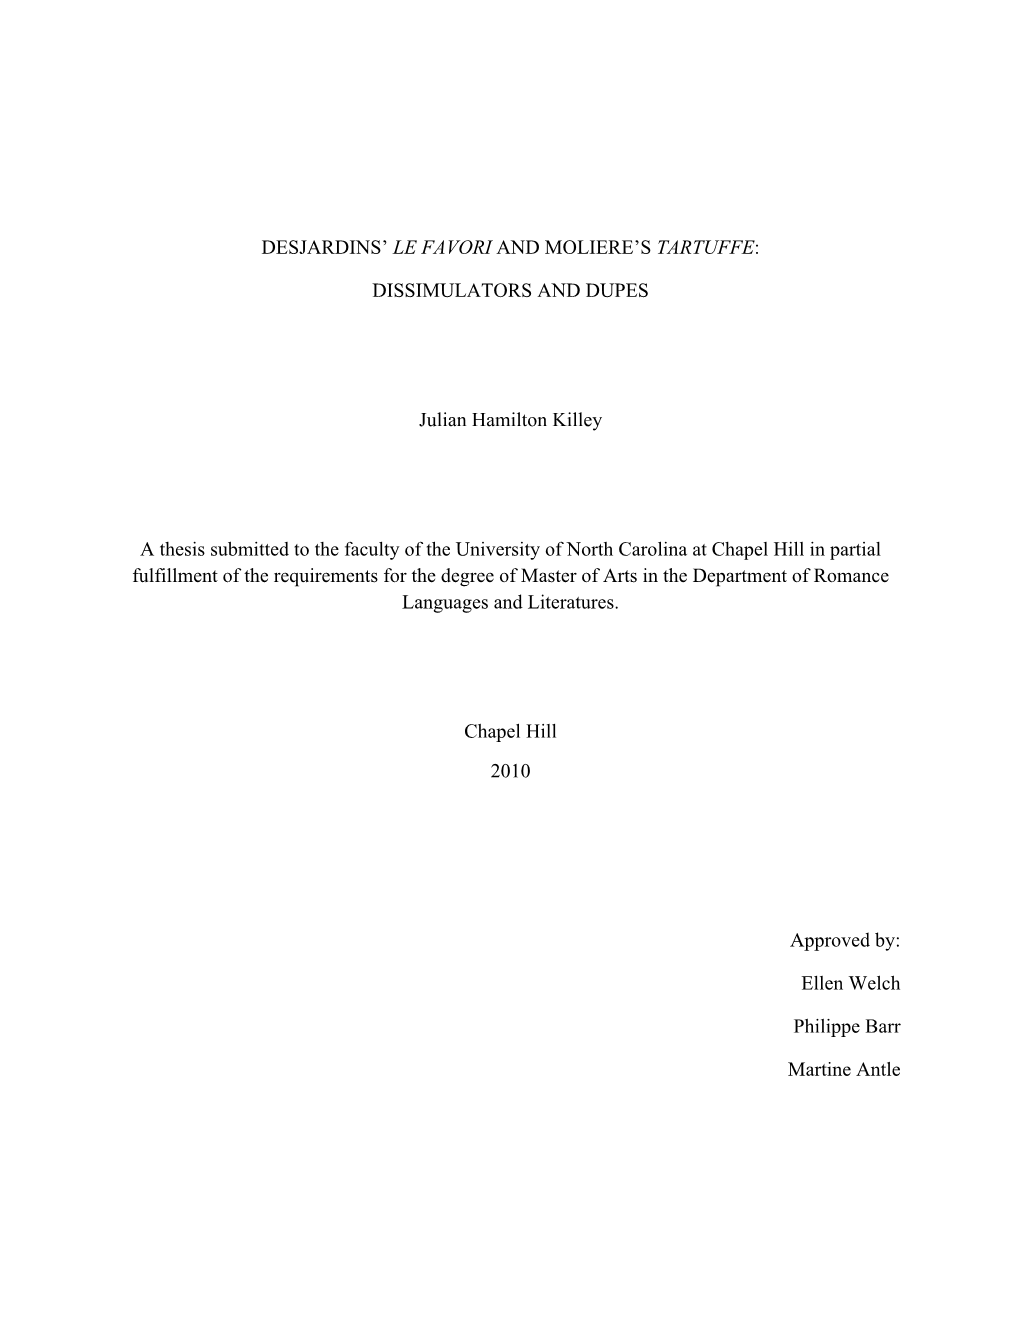 DESJARDINS' LE FAVORI and MOLIERE's TARTUFFE: DISSIMULATORS and DUPES Julian Hamilton Killey a Thesis Submitted to the Facu